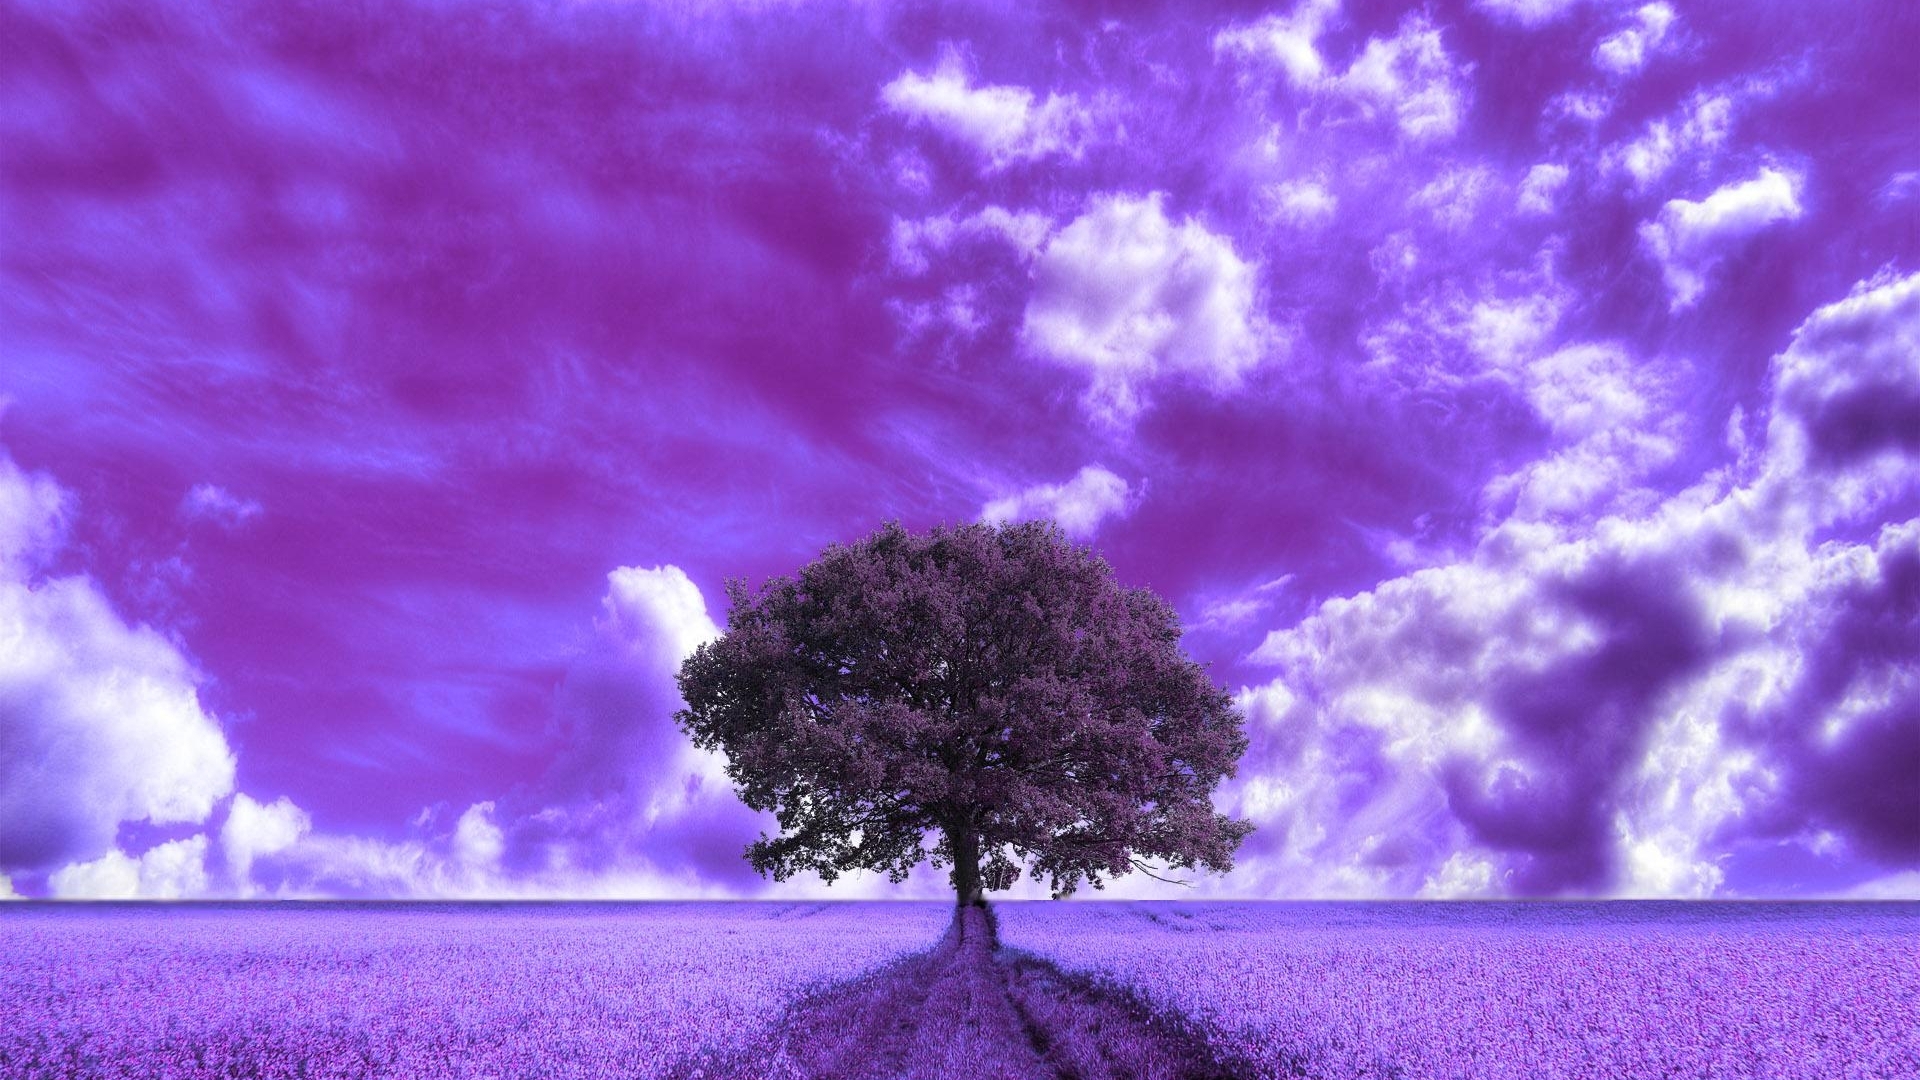 Beautiful Purple Field Wallpaper In Nature With